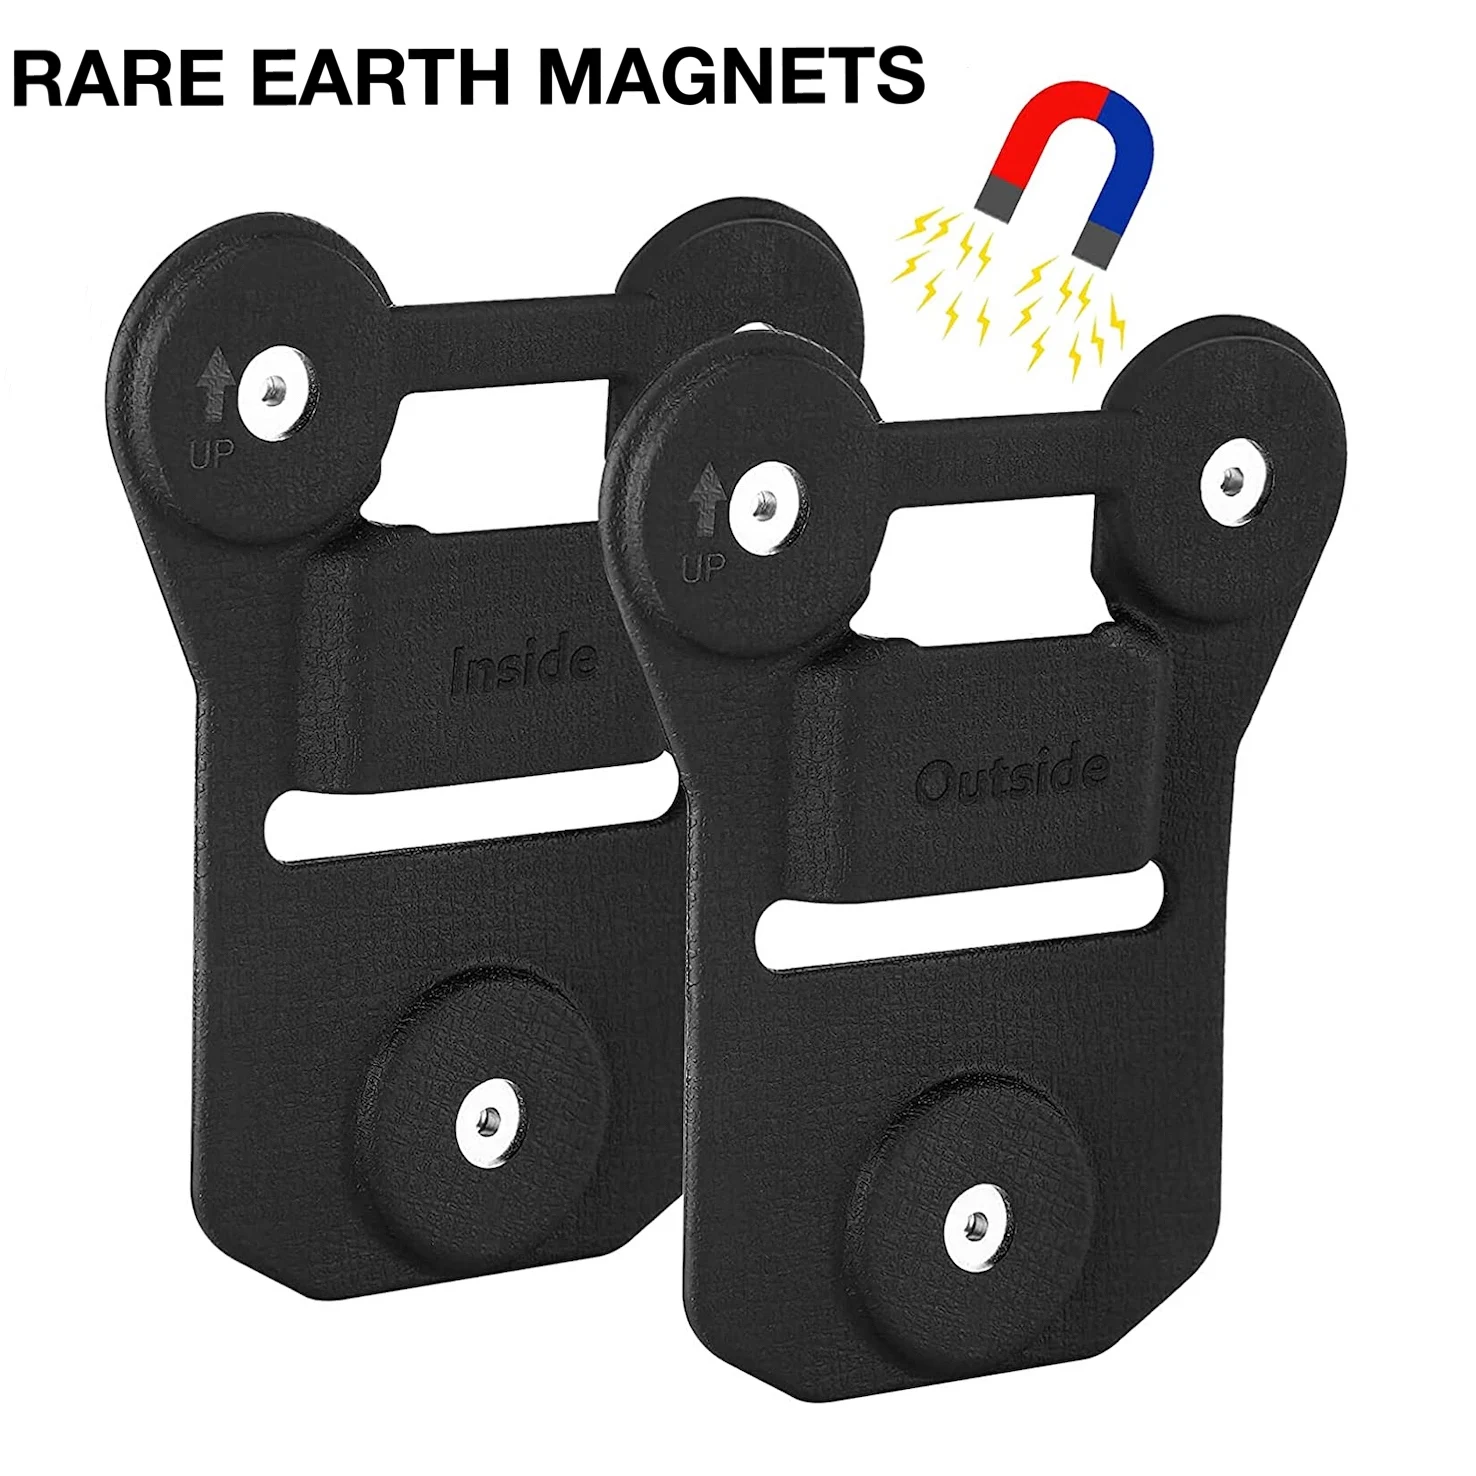 

Universal Body Camera Magnetic Mount Police Camera Holder Rare Earth Magnet Strong Power Suction Back Clip for All Bodycams